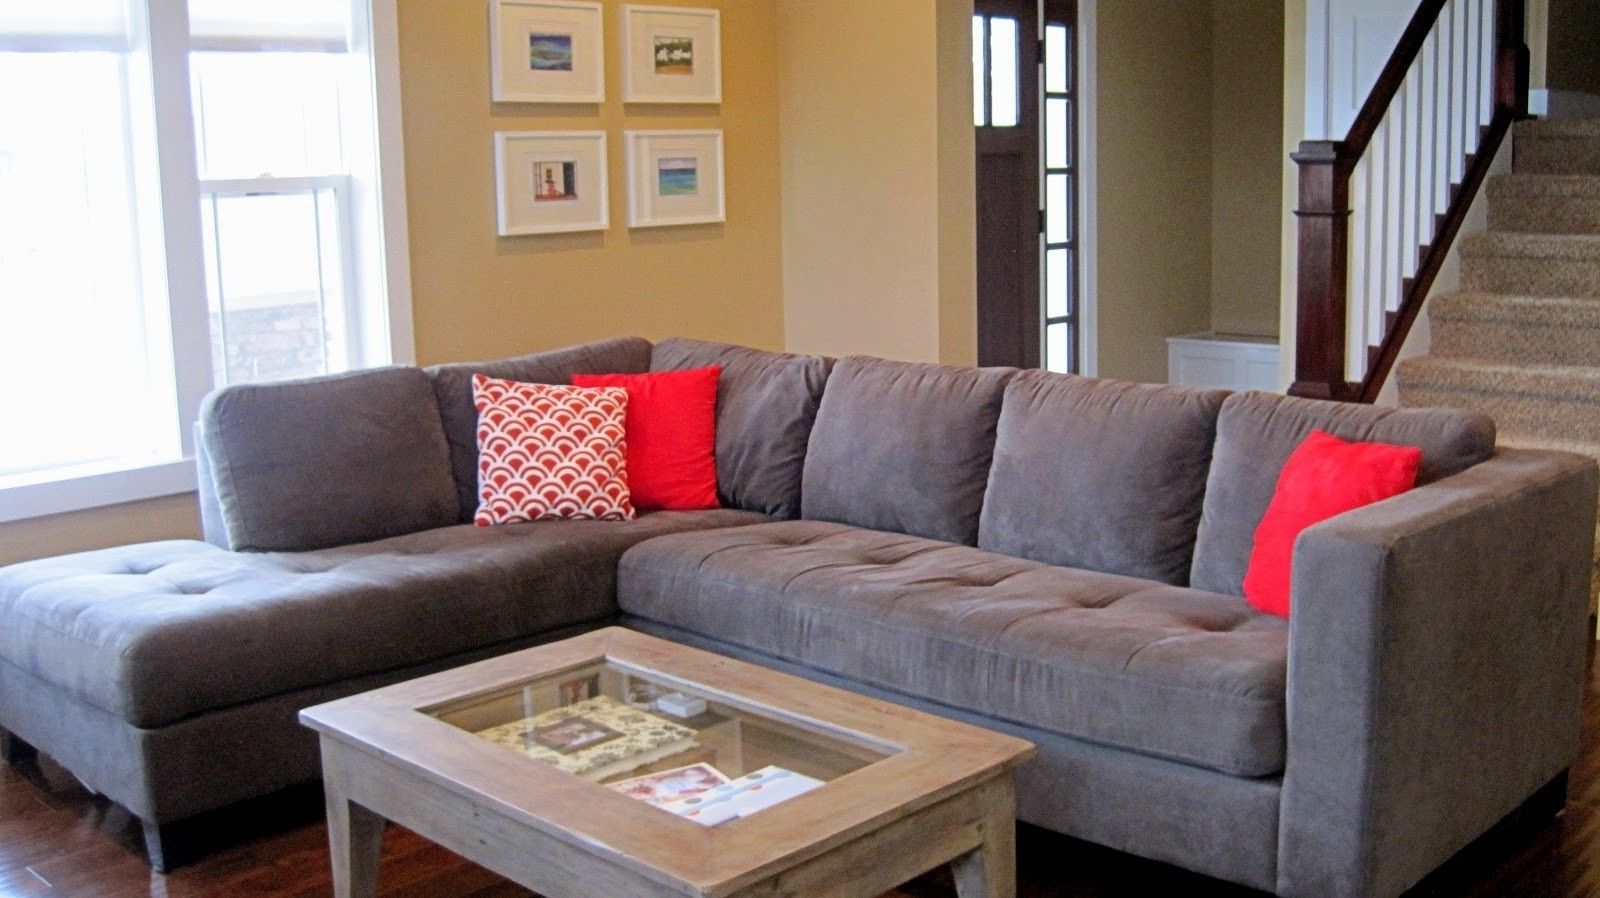 Living Room : Living Room Furniture L Shaped Gray Velvet Tufted Within Most Popular Red Sleeper Sofas (View 13 of 15)